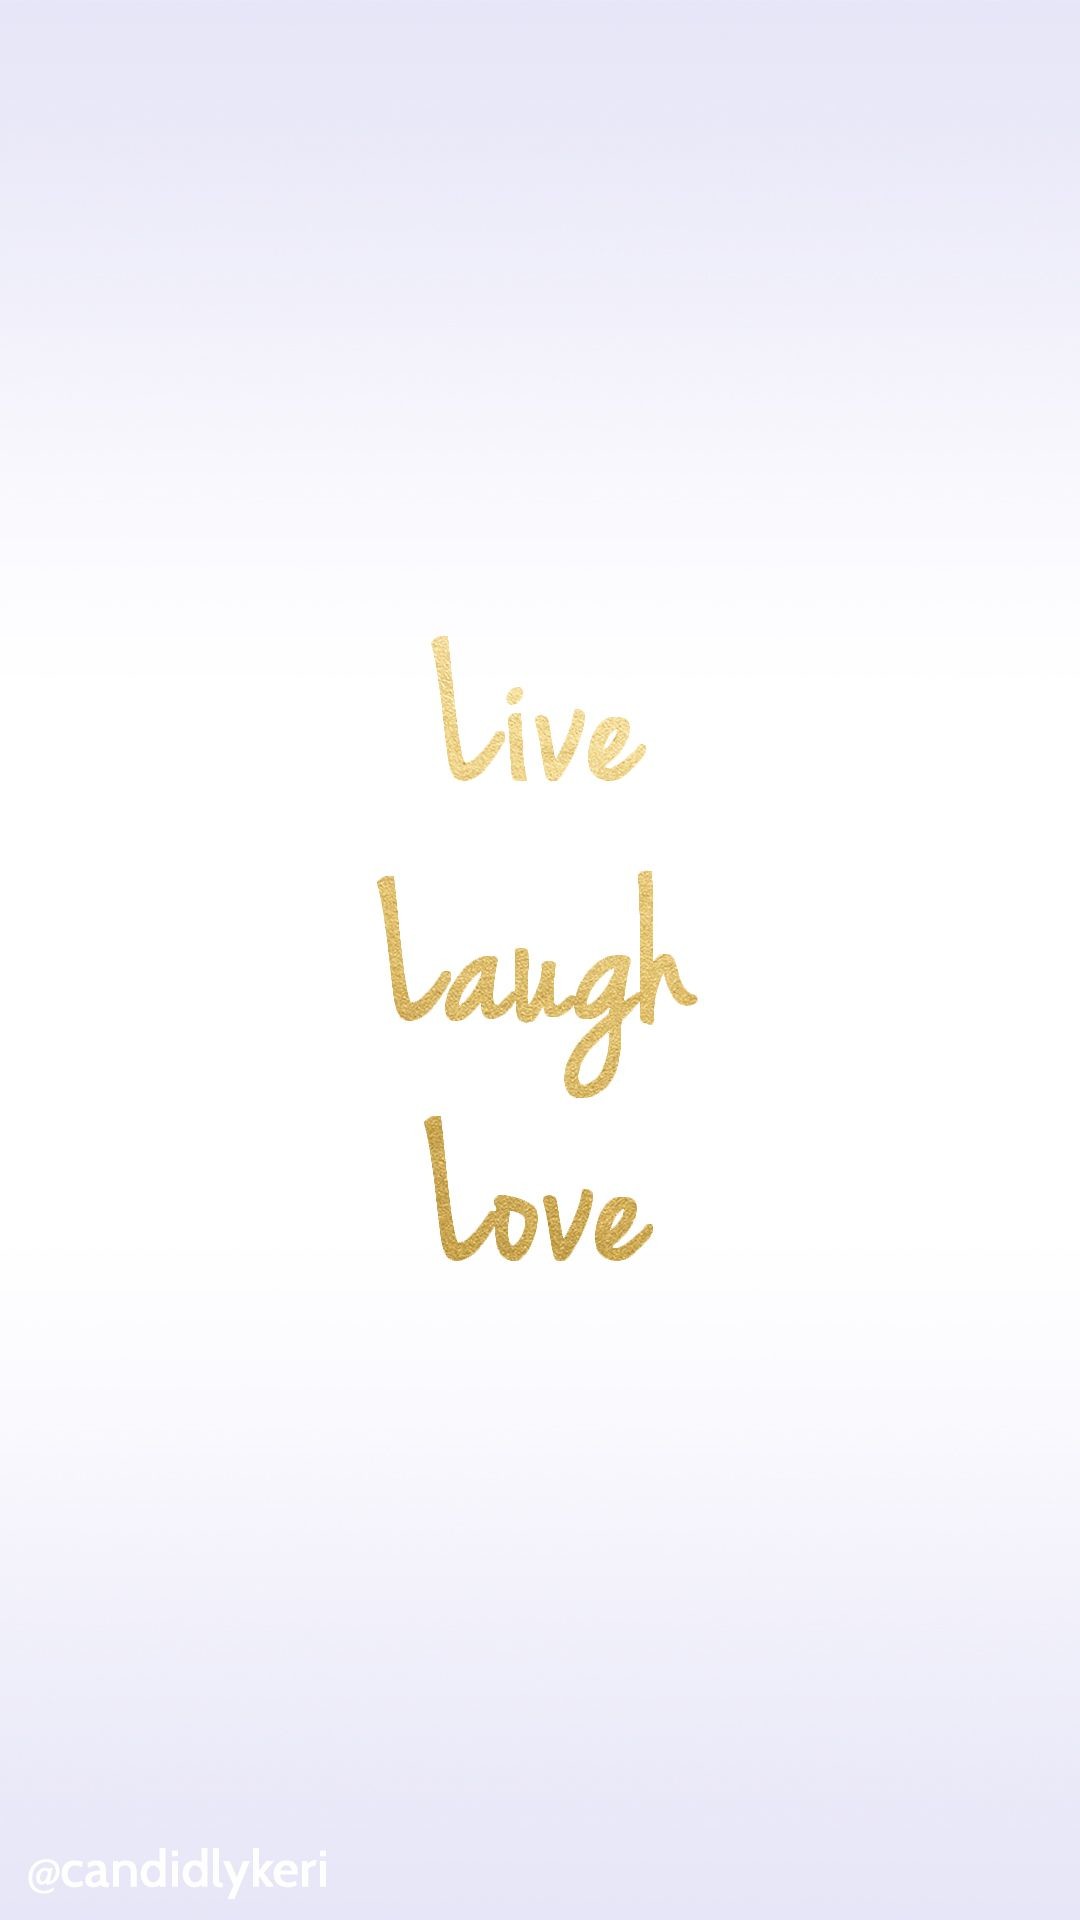 1080x1920 "Live Laugh Love" gold foil wallpaper free download for iPhone android or  desktop background